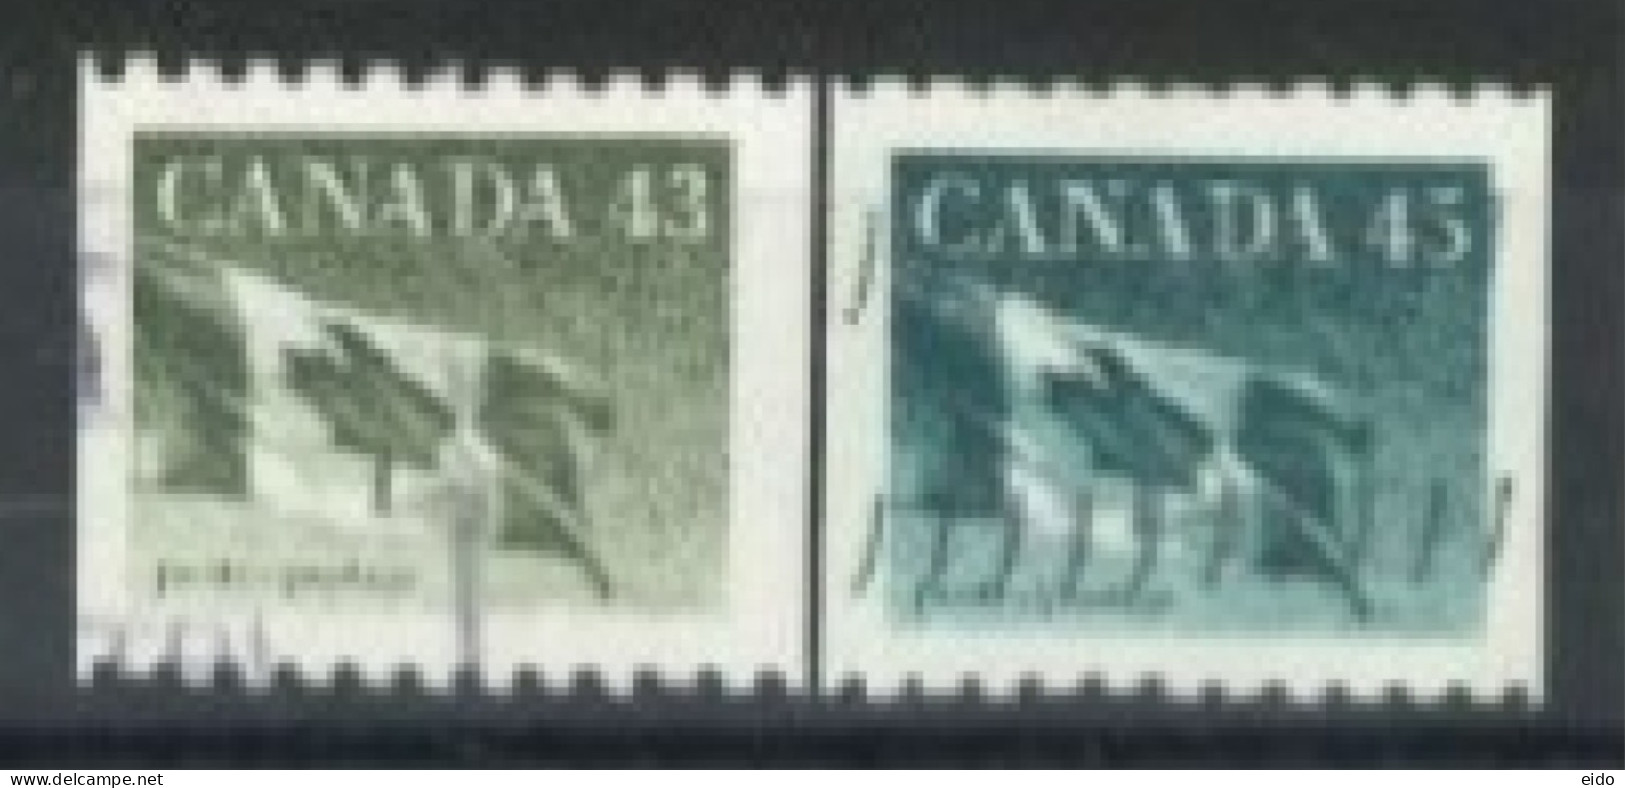 CANADA - 1989, CANADIAN FLAG STAMPS SET OF 2, USED. - Gebraucht